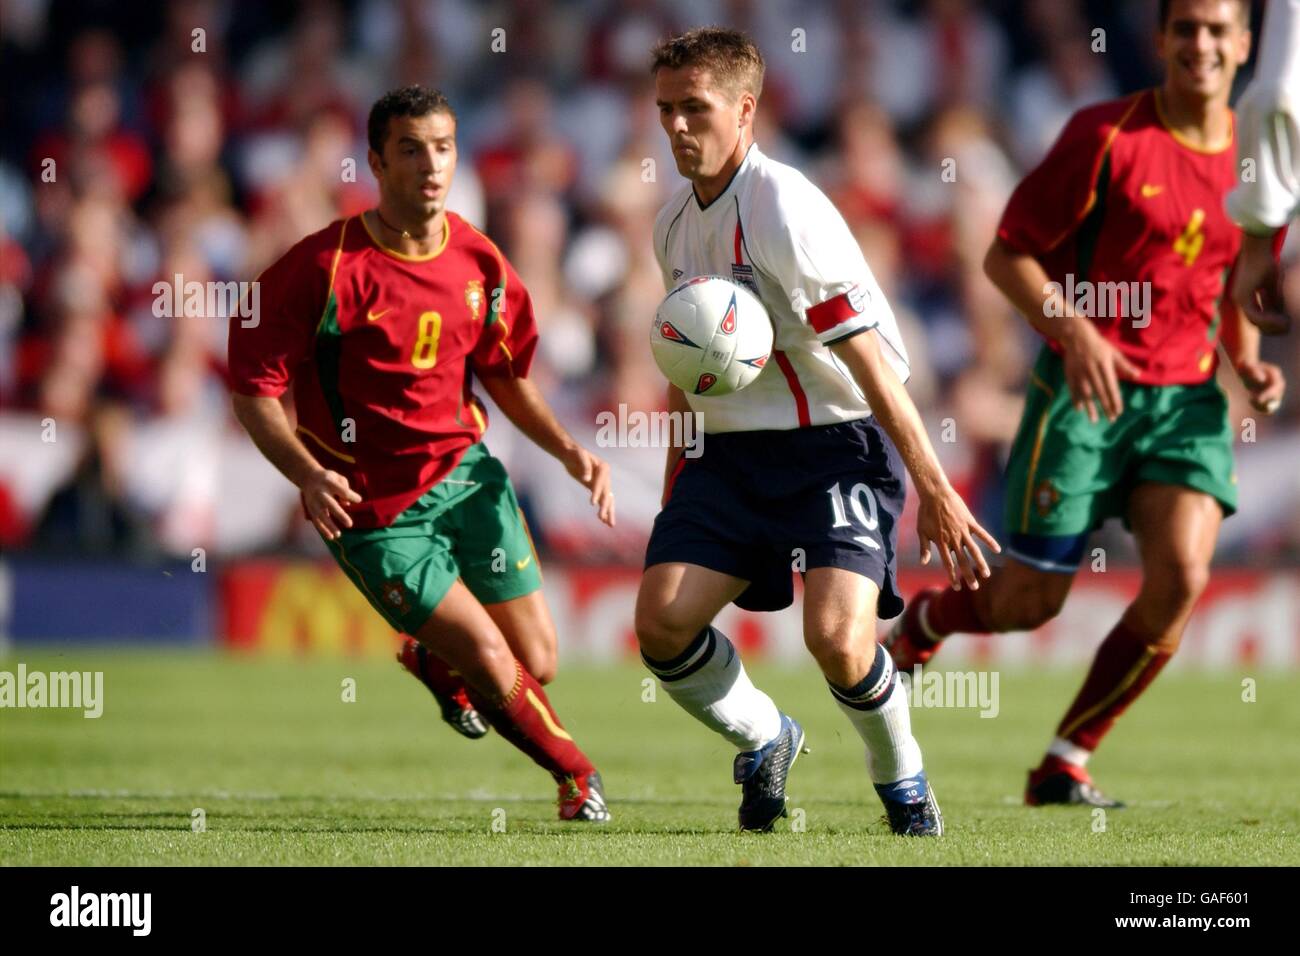 England's Michael Owen controls the ball in front of Portugal's Simao Sabrosa (l) Stock Photo